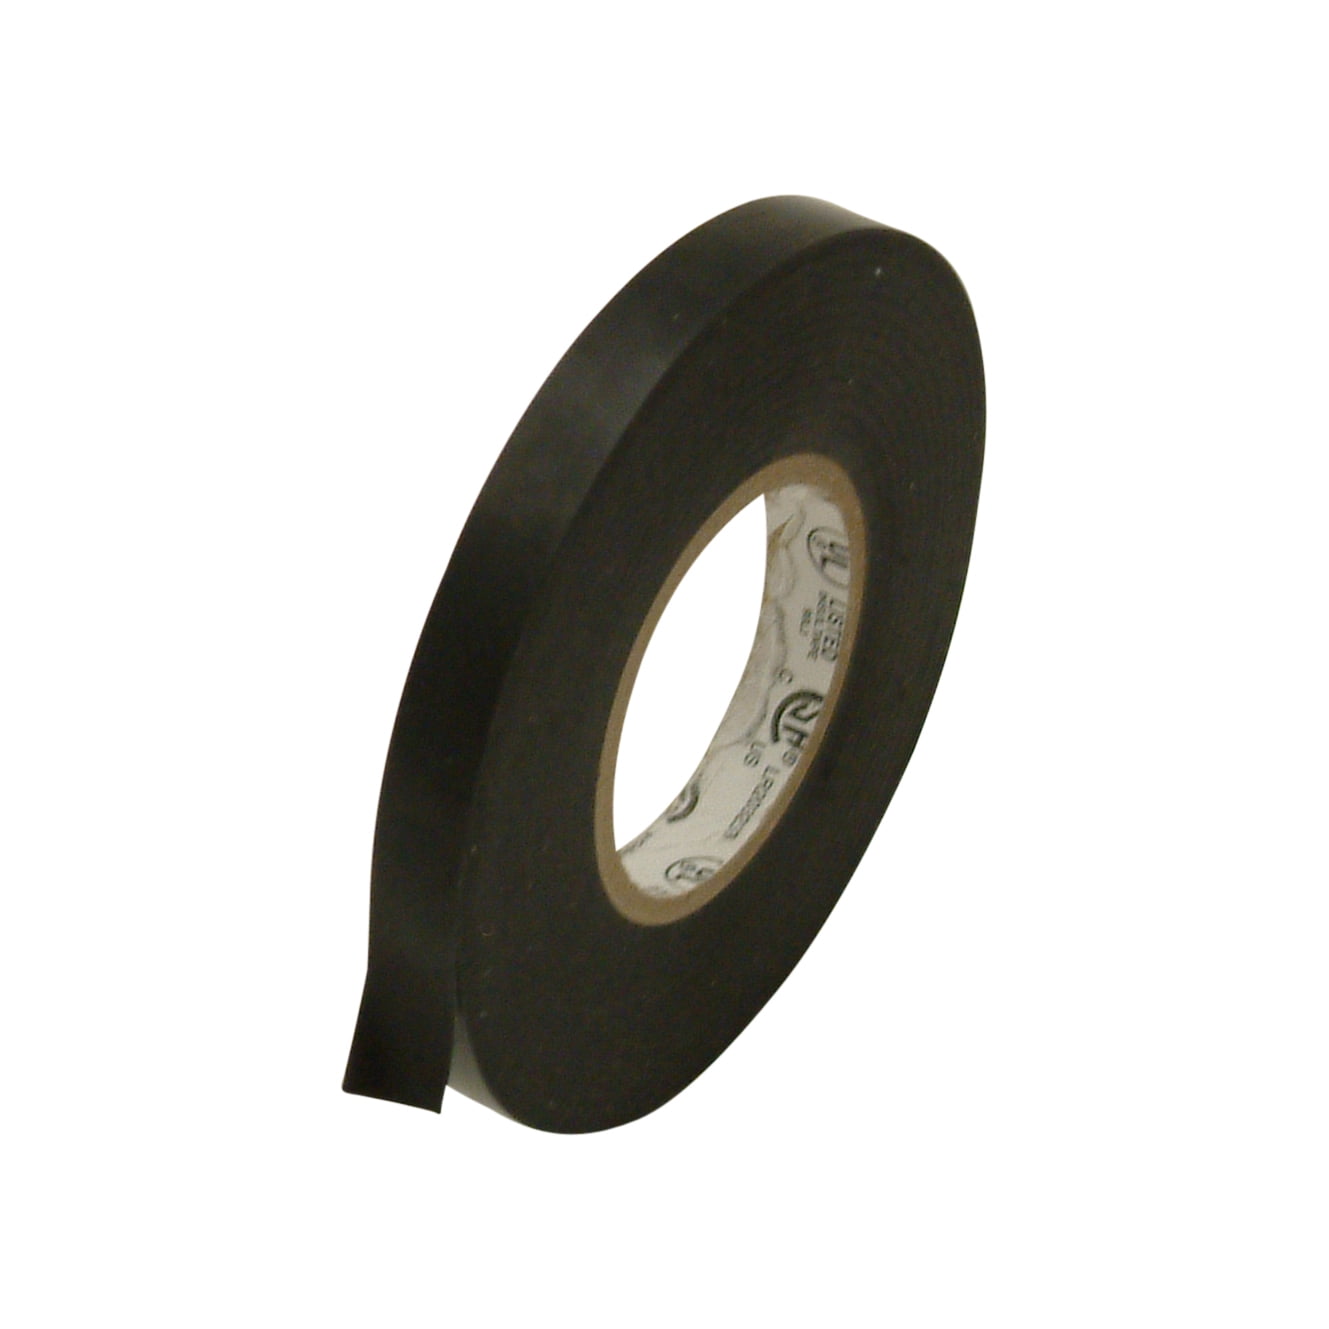 TapesSupply 20 Rolls Black Electrical Tape 3/4" X 66 Ft 